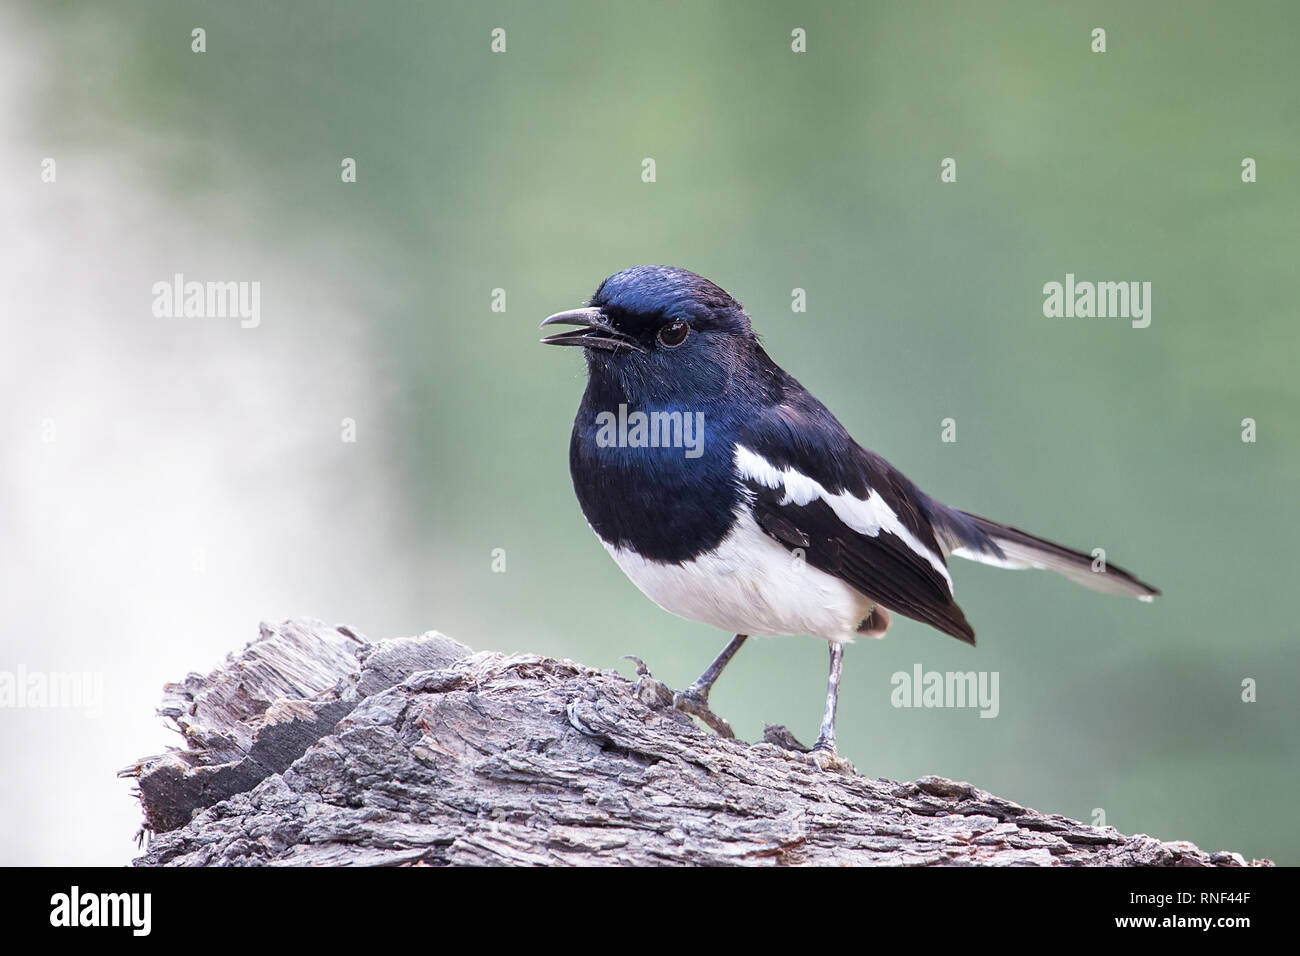 Oriental magpie-robin (Copsychus saularis) sitting on a tree in Keoladeo Ghana National Park, Bharatpur, India. The park was declared a protected sanc Stock Photo